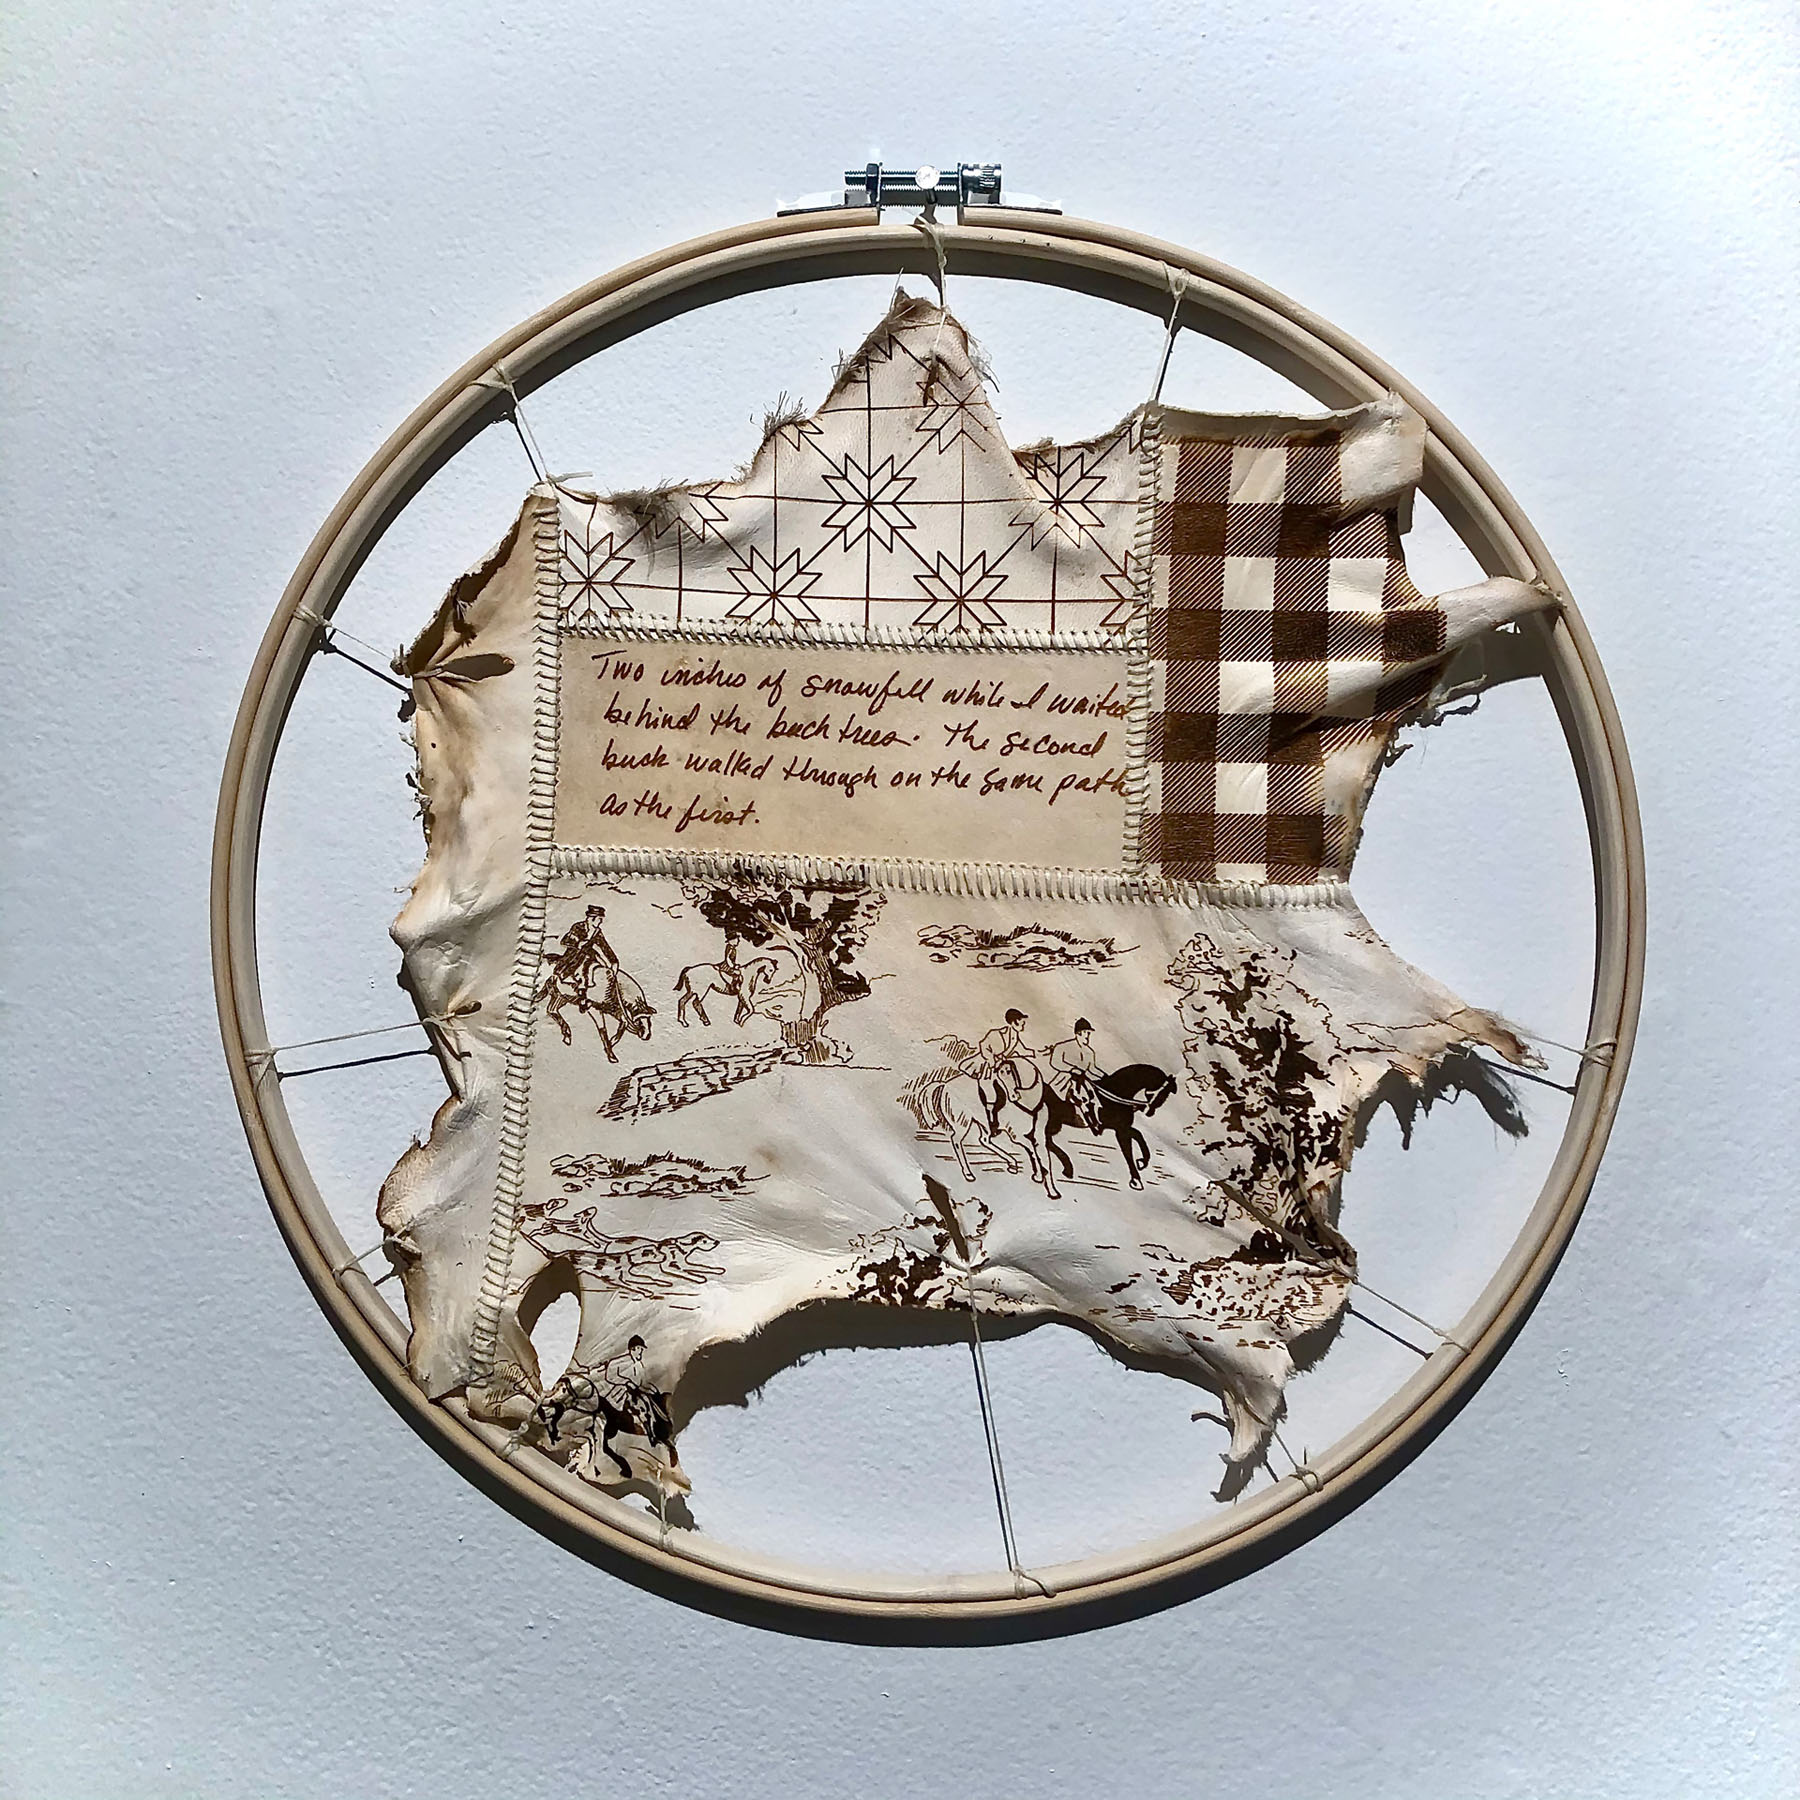 Tammy Renée Brackett, Andover, NY. “Untitled (Remnant) #2,” laser etched deer hide, thread, embroidery hoop.